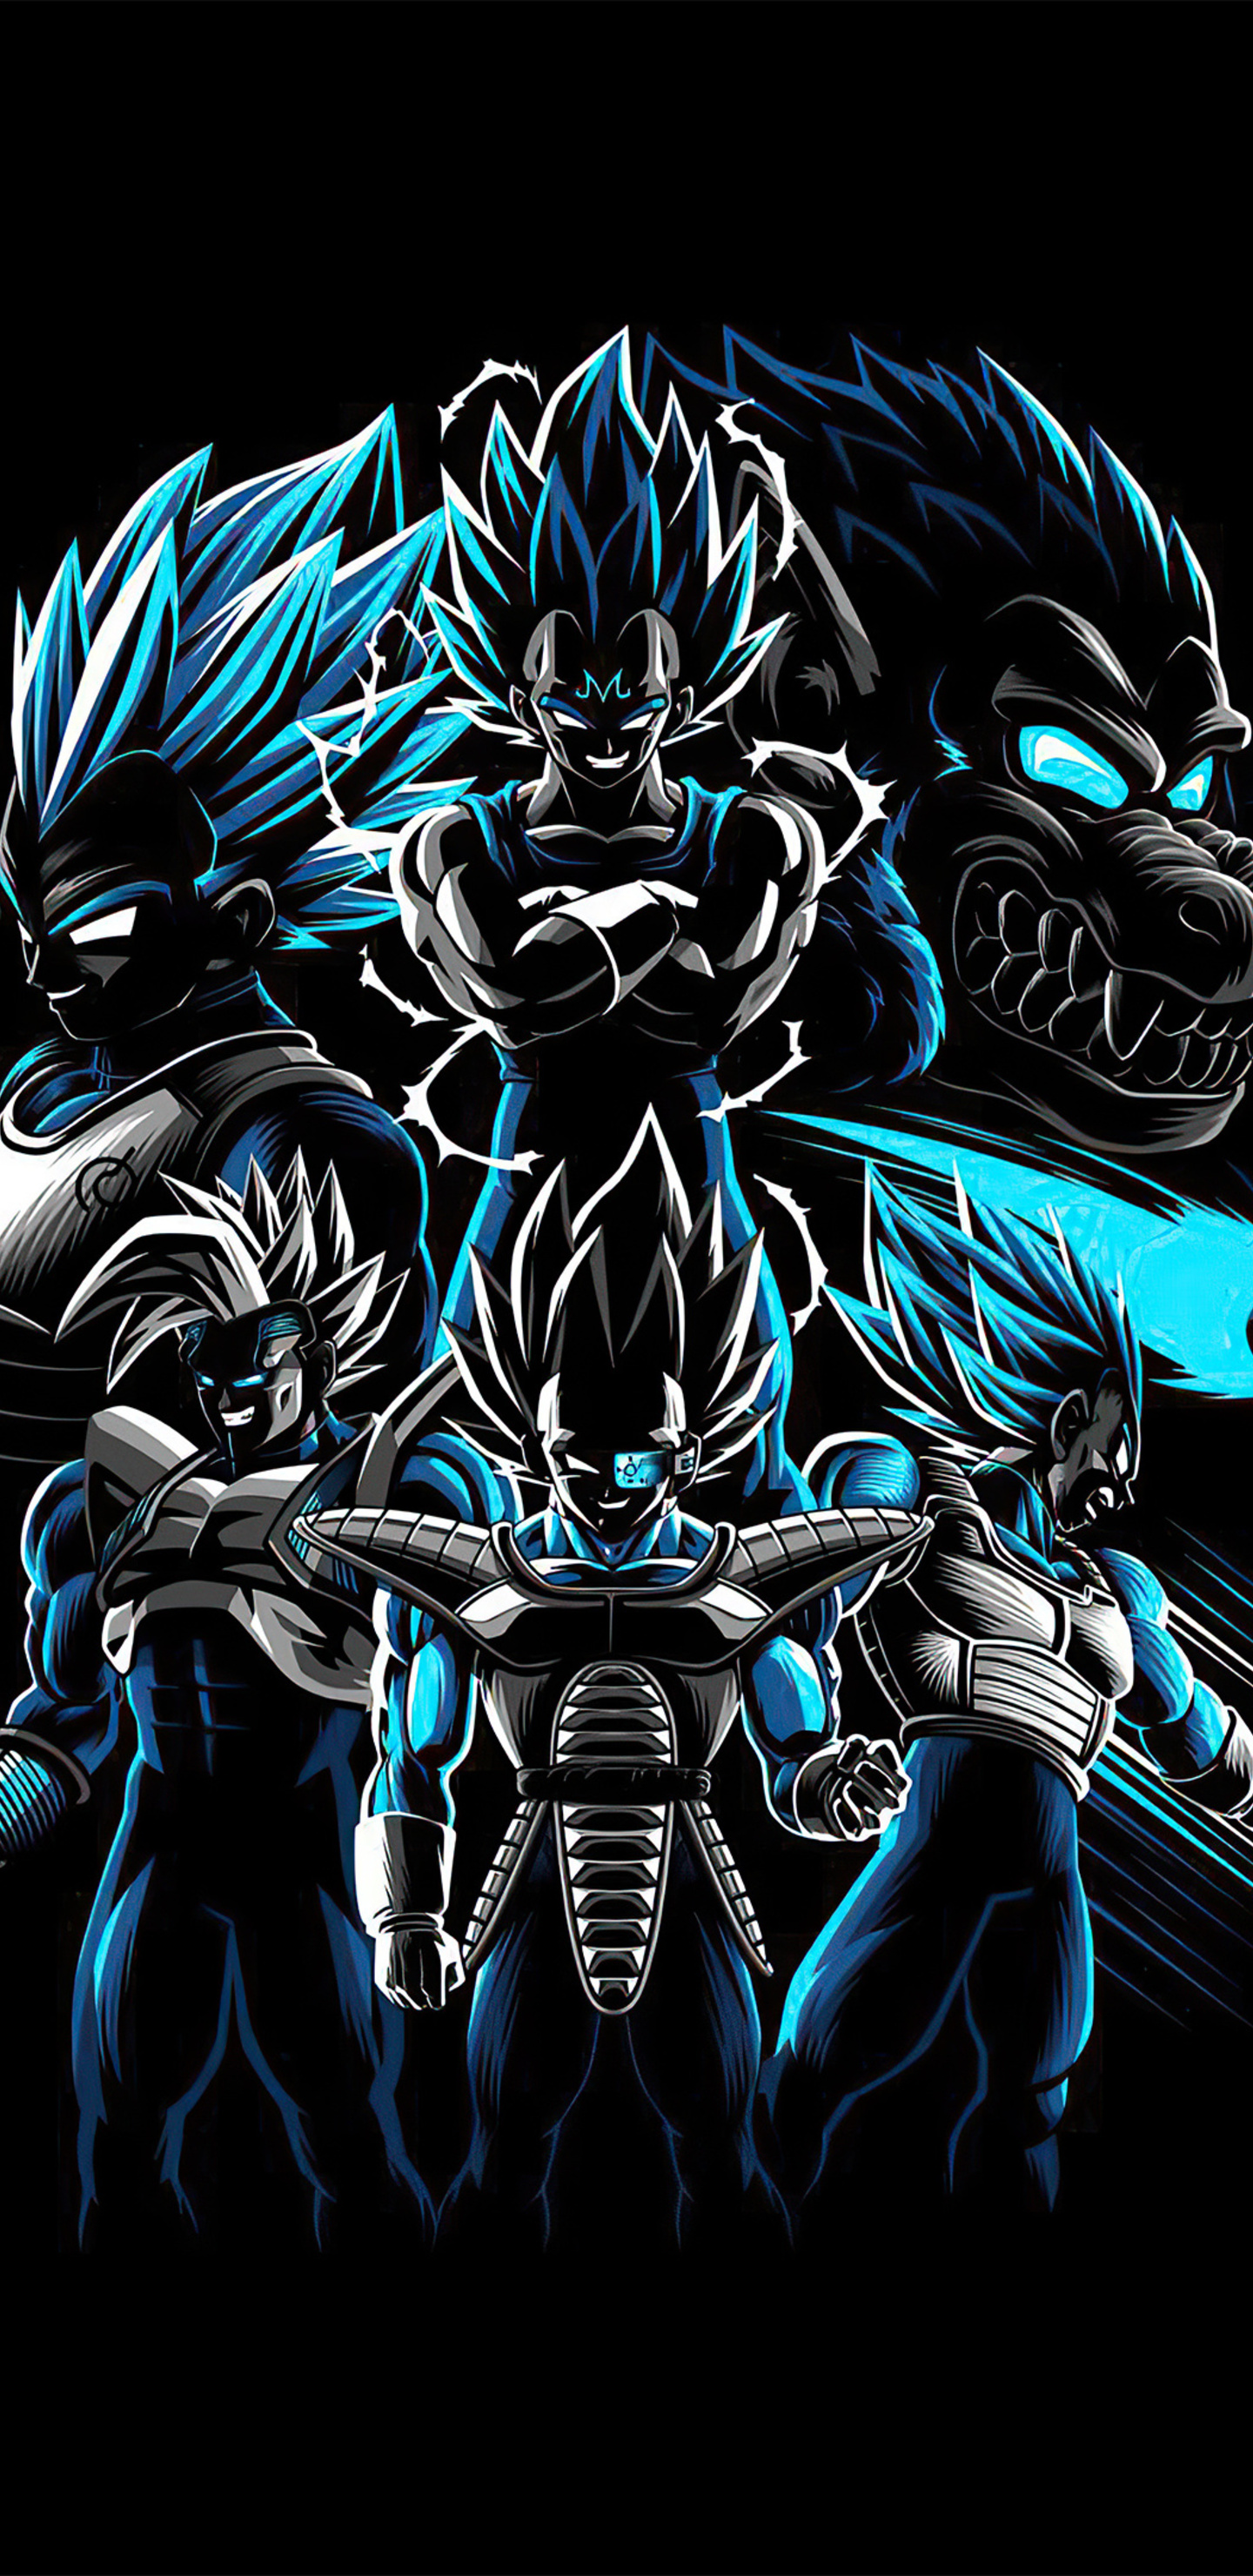 1440x2960 Dragon Ball Z Team 4k Samsung Galaxy Note 9,8, S9,S8,S8+ QHD HD  4k Wallpapers, Images, Backgrounds, Photos and Pictures